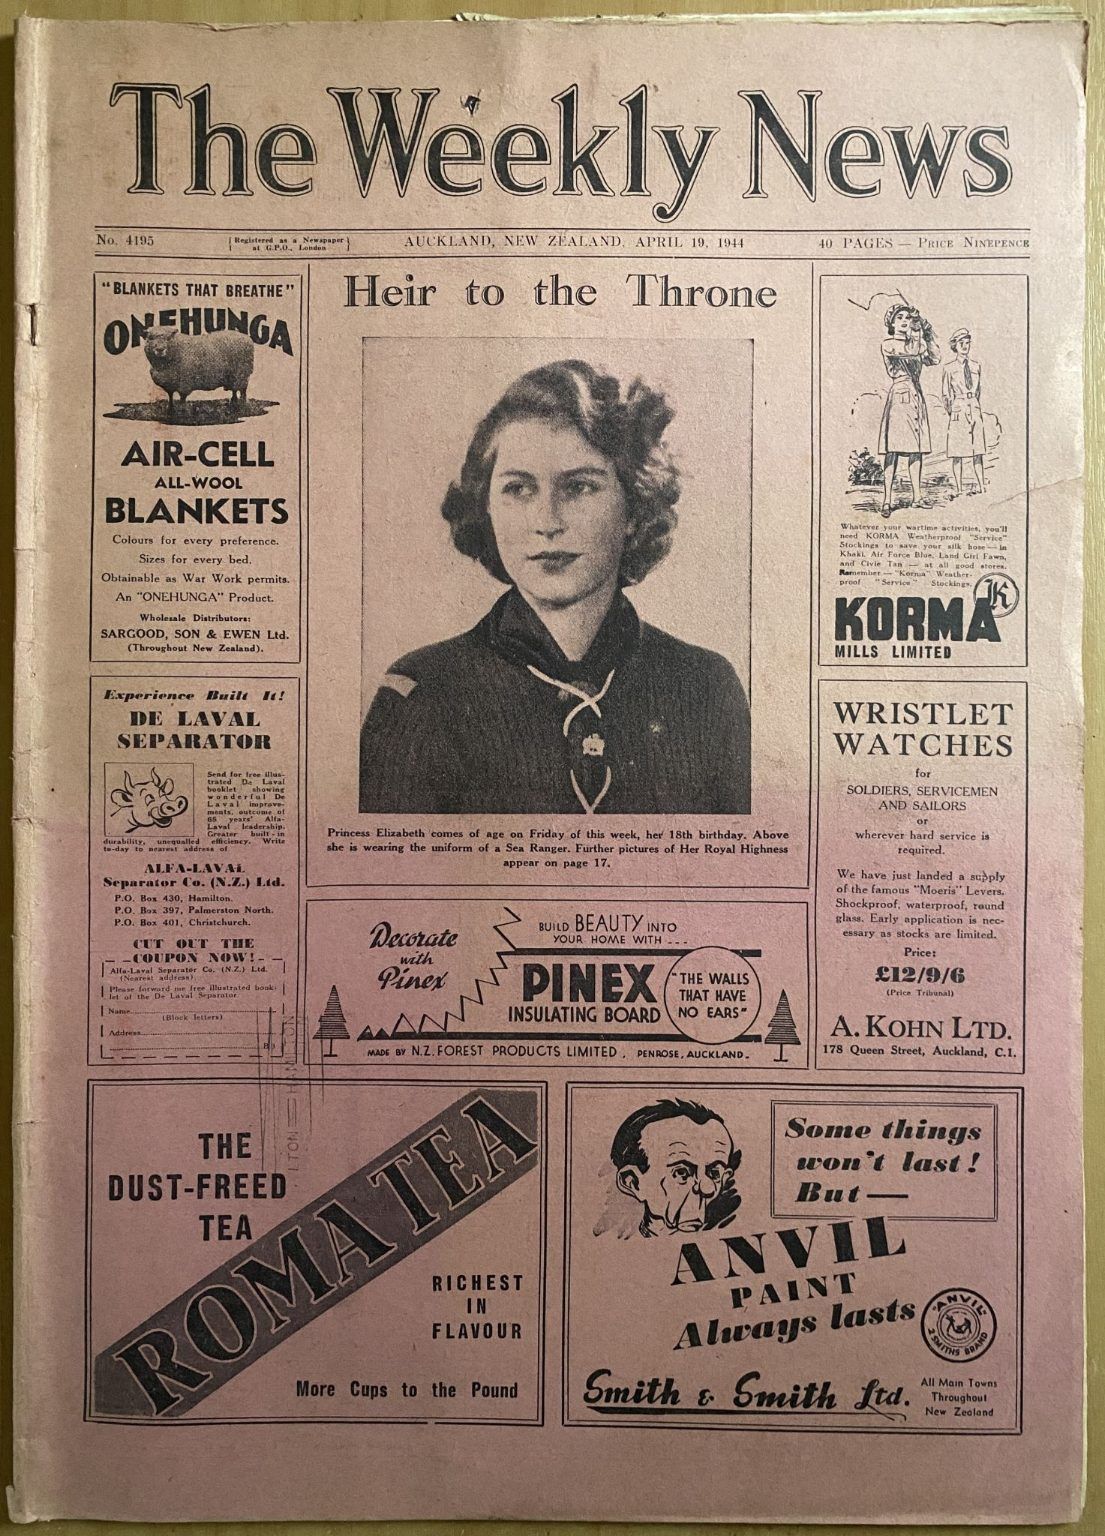 OLD NEWSPAPER: The Weekly News - No. 4195, 19 April 1944